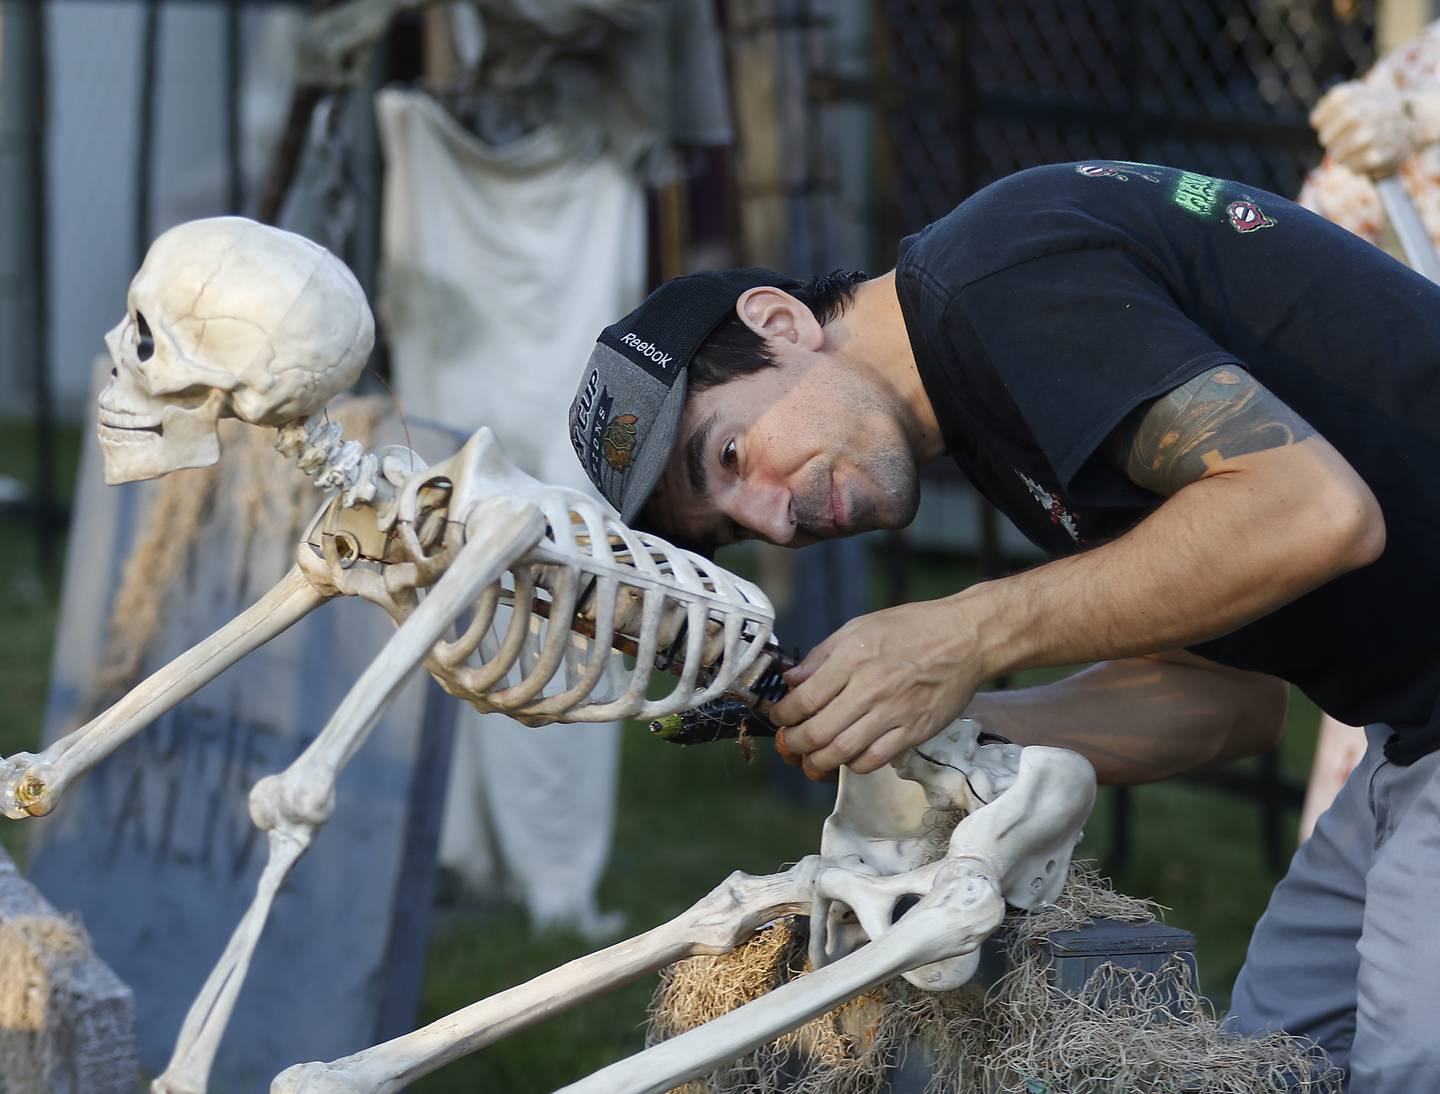 Chris Skaja works on setting up the "Massacre on McKinley" Halloween display at his home, 4 McKinley St. in Lake in the Hills, on Wednesday, Oct. 5, 2022. The display opens to the public on Saturday.